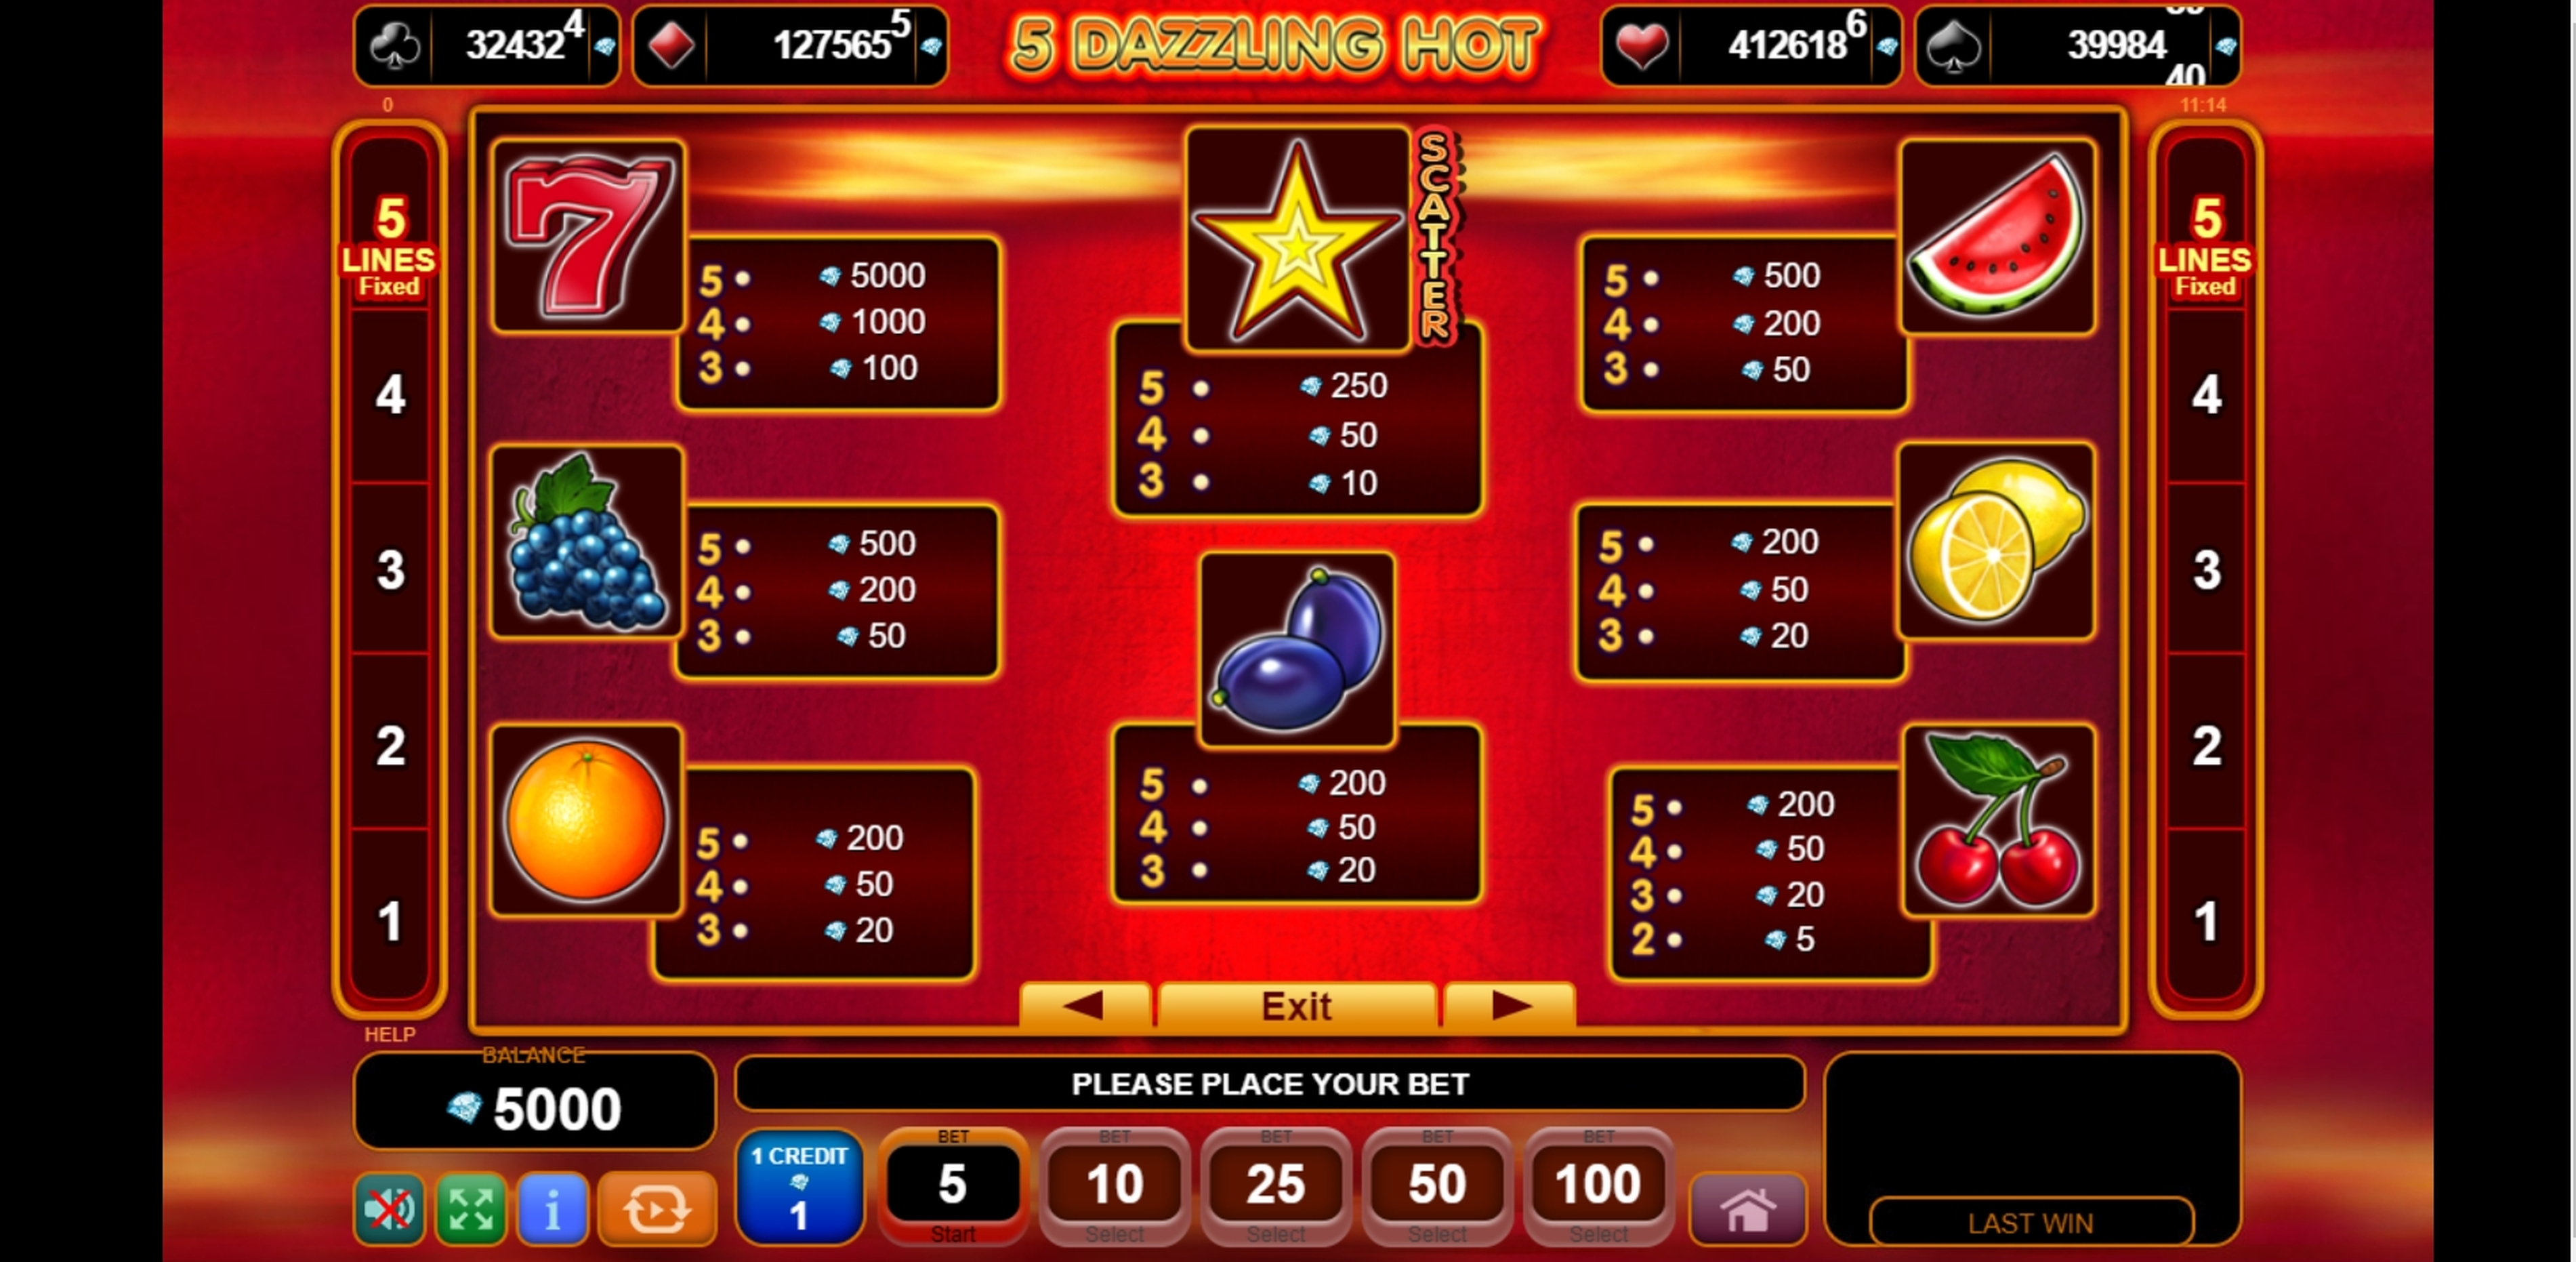 Info of 5 Dazzling Hot Slot Game by EGT